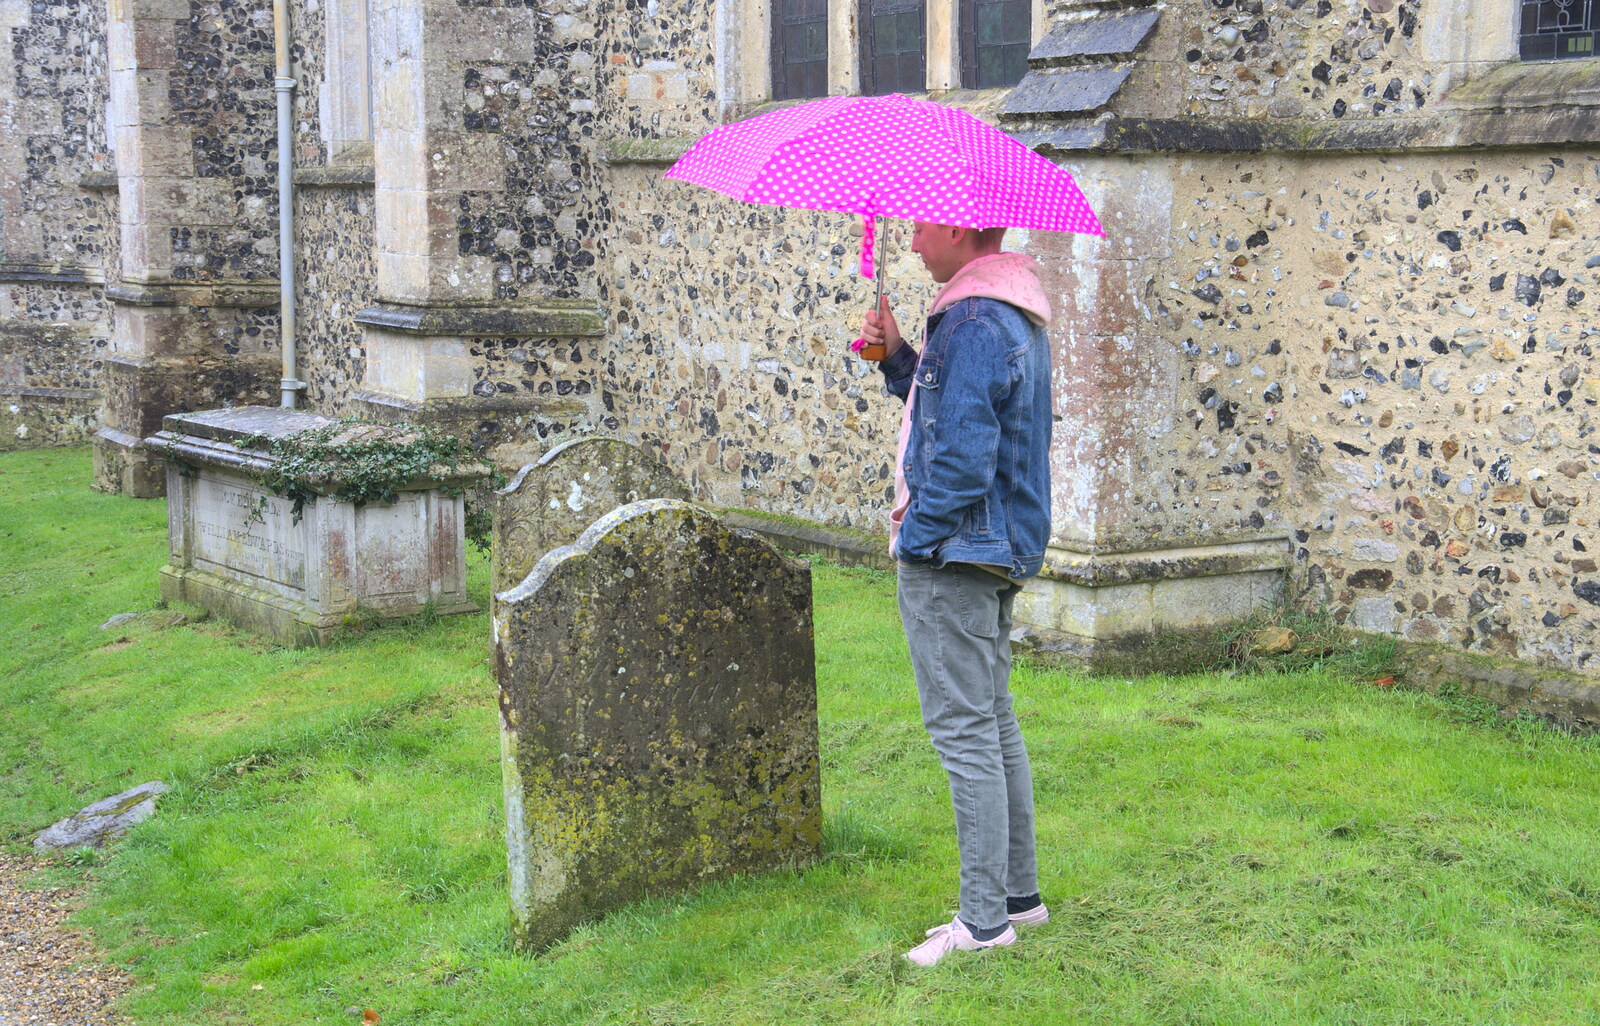 Kai waits under an umbrella from Darts at the Beaky, and a Visit From Brussels, Occold and Thorndon, Suffolk - 9th April 2018